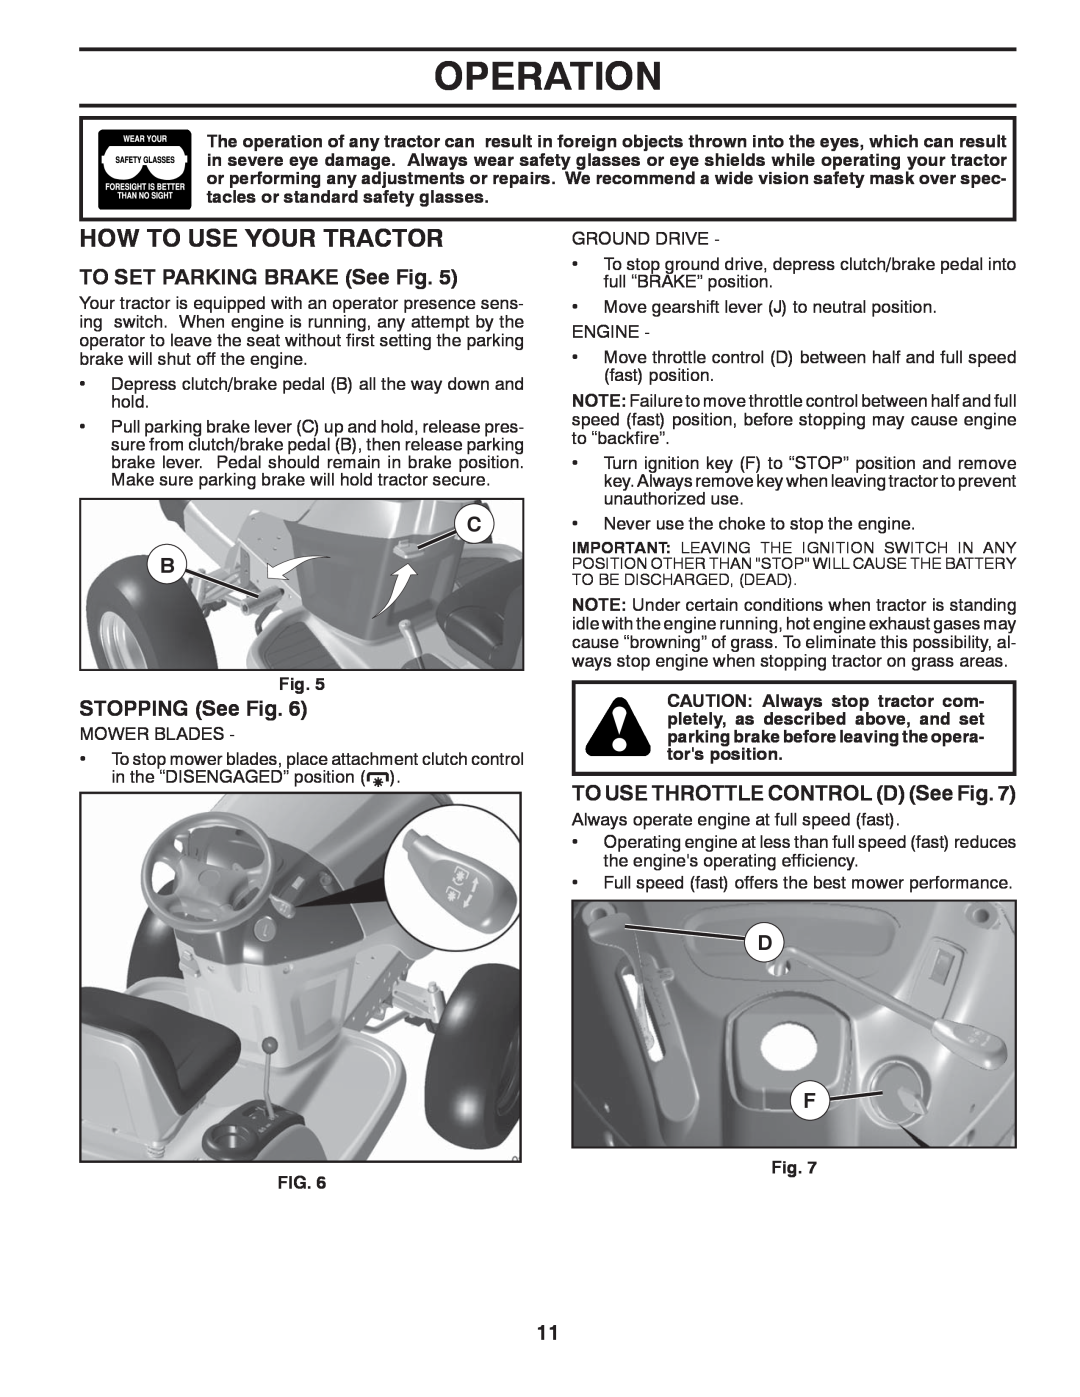 McCulloch 422800 manual How To Use Your Tractor, TO SET PARKING BRAKE See Fig, STOPPING See Fig, Operation 